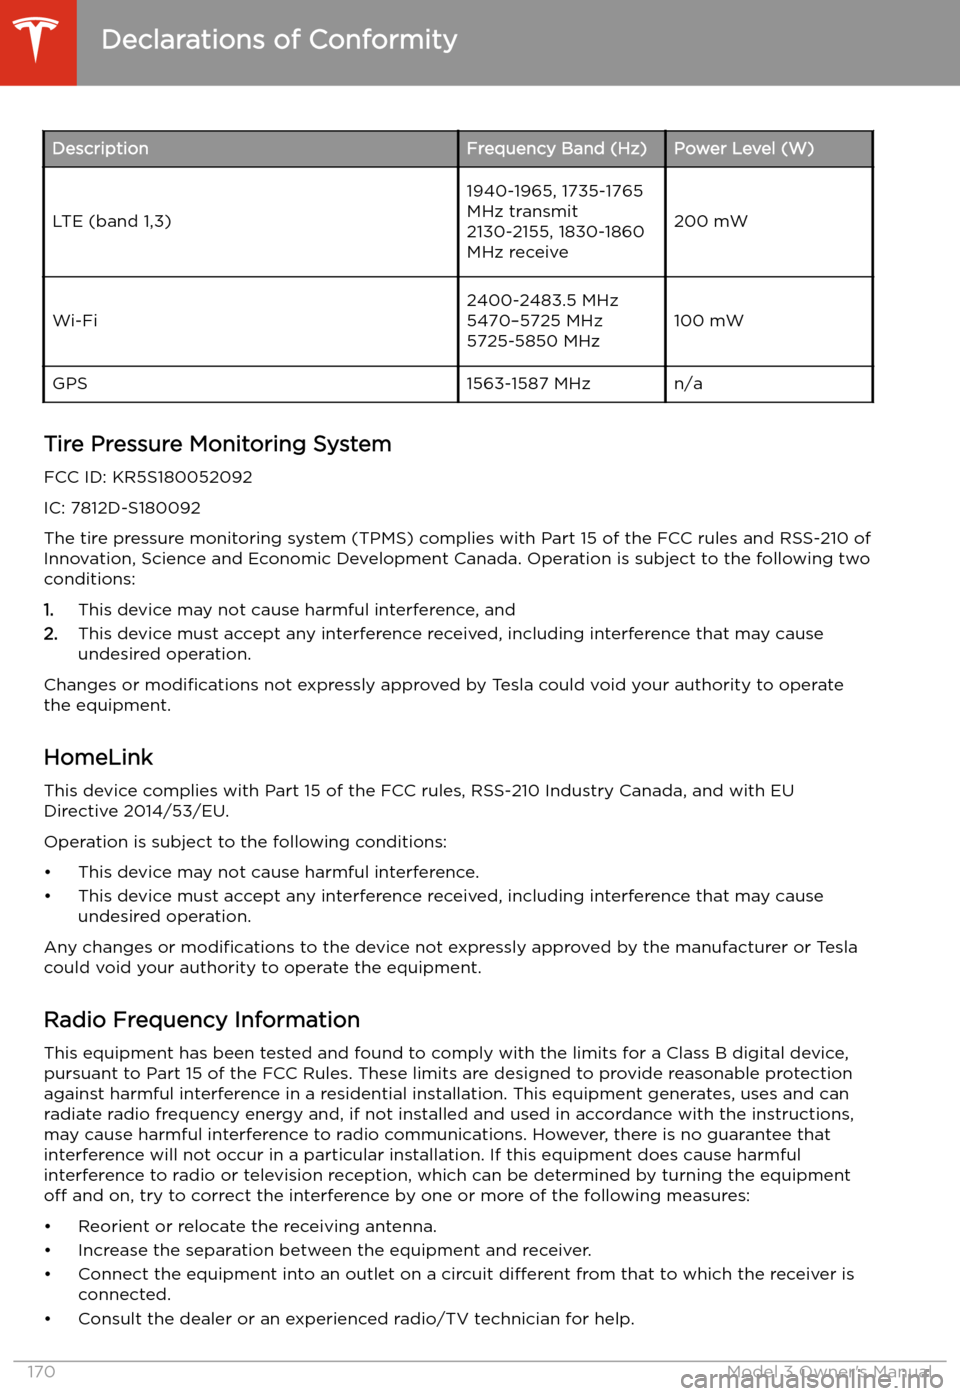 TESLA MODEL 3 2019  Owners Manual (Europe) DescriptionFrequency Band (Hz)Power Level (W)
LTE (band 1,3)
1940-1965, 1735-1765
MHz transmit
2130-2155, 1830-1860
MHz receive
200 mWWi-Fi2400-2483.5 MHz
5470